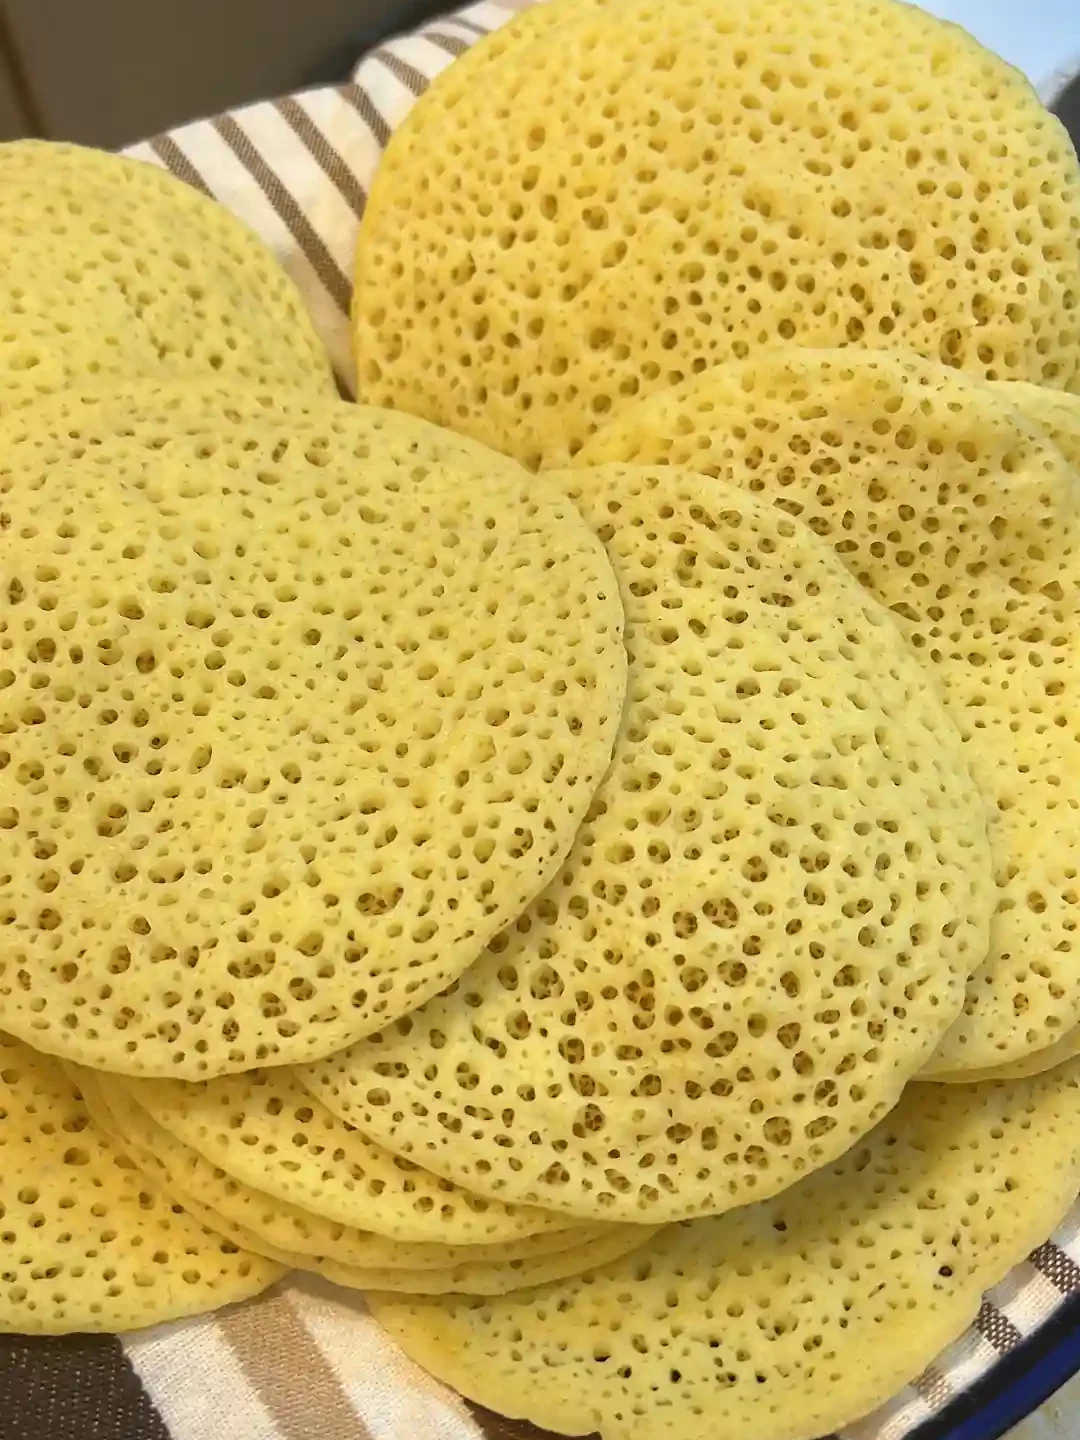 baghrir pancakes is famous for breakfast in Morocco